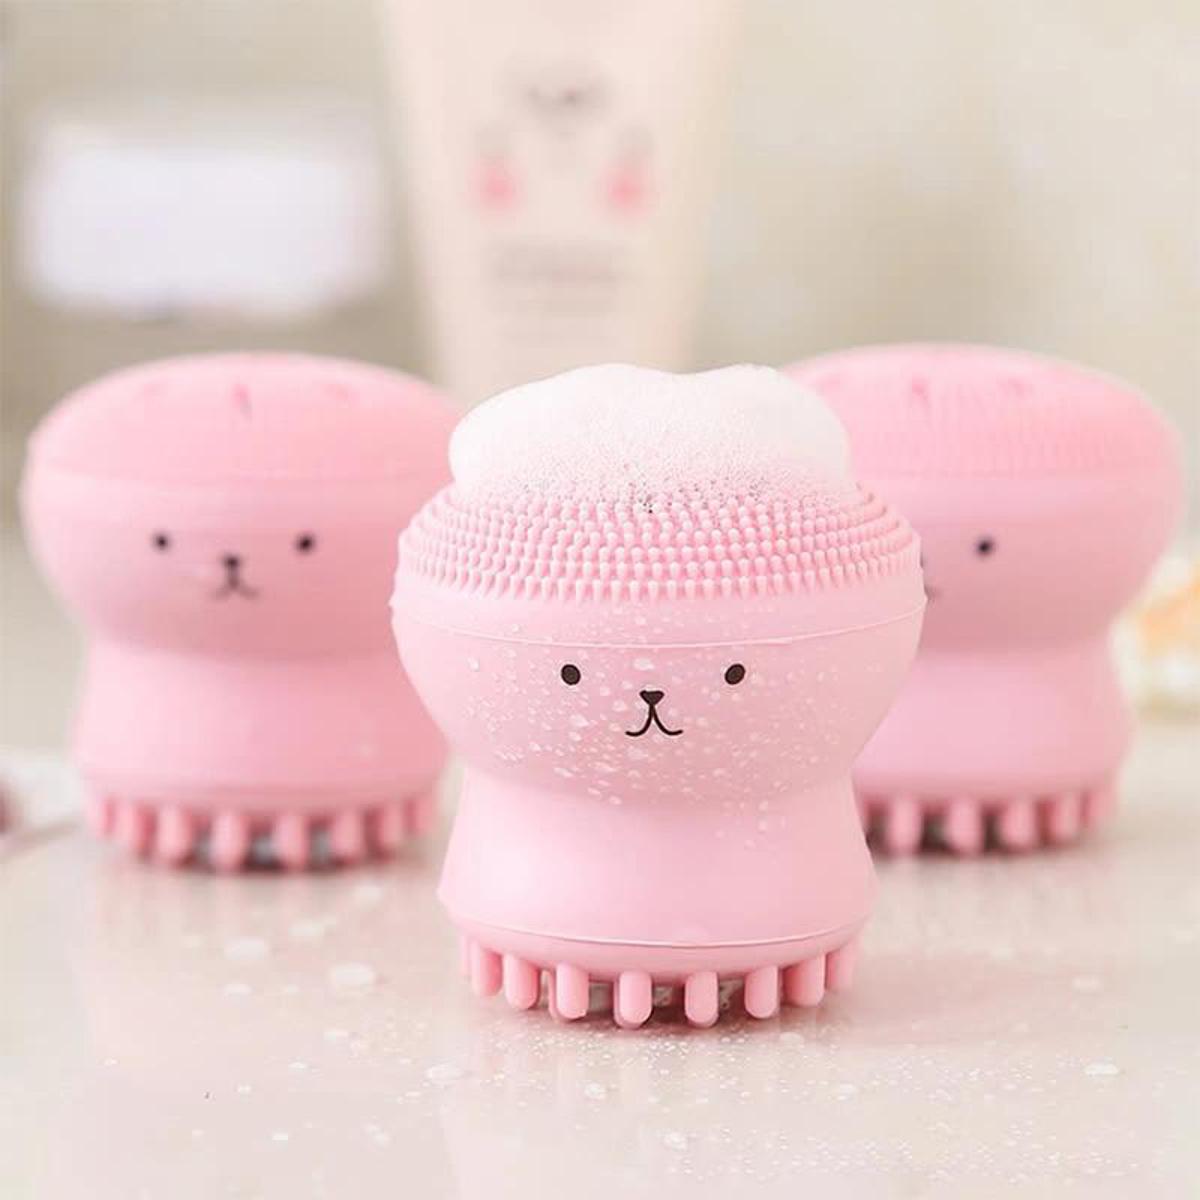 Face Cleansing Brush - Octopus Shape Facial Cleanser Massager